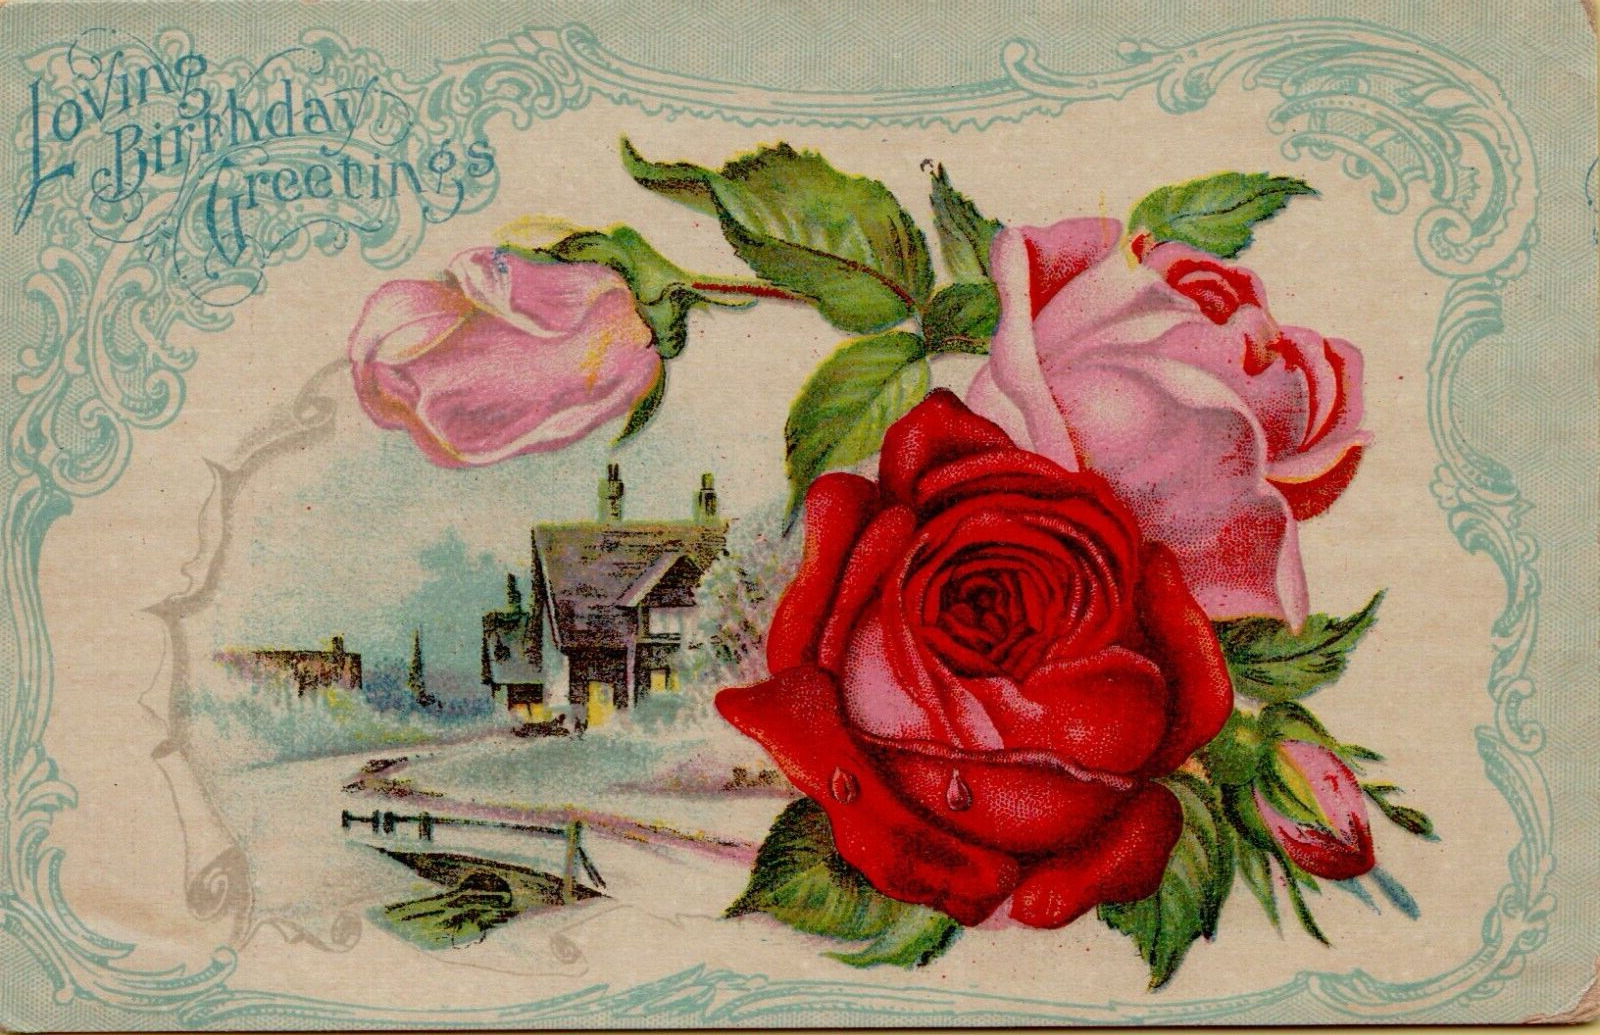 Loving Birthday Greetings Postcard Roses Road Leading to Home c1910 Unposted